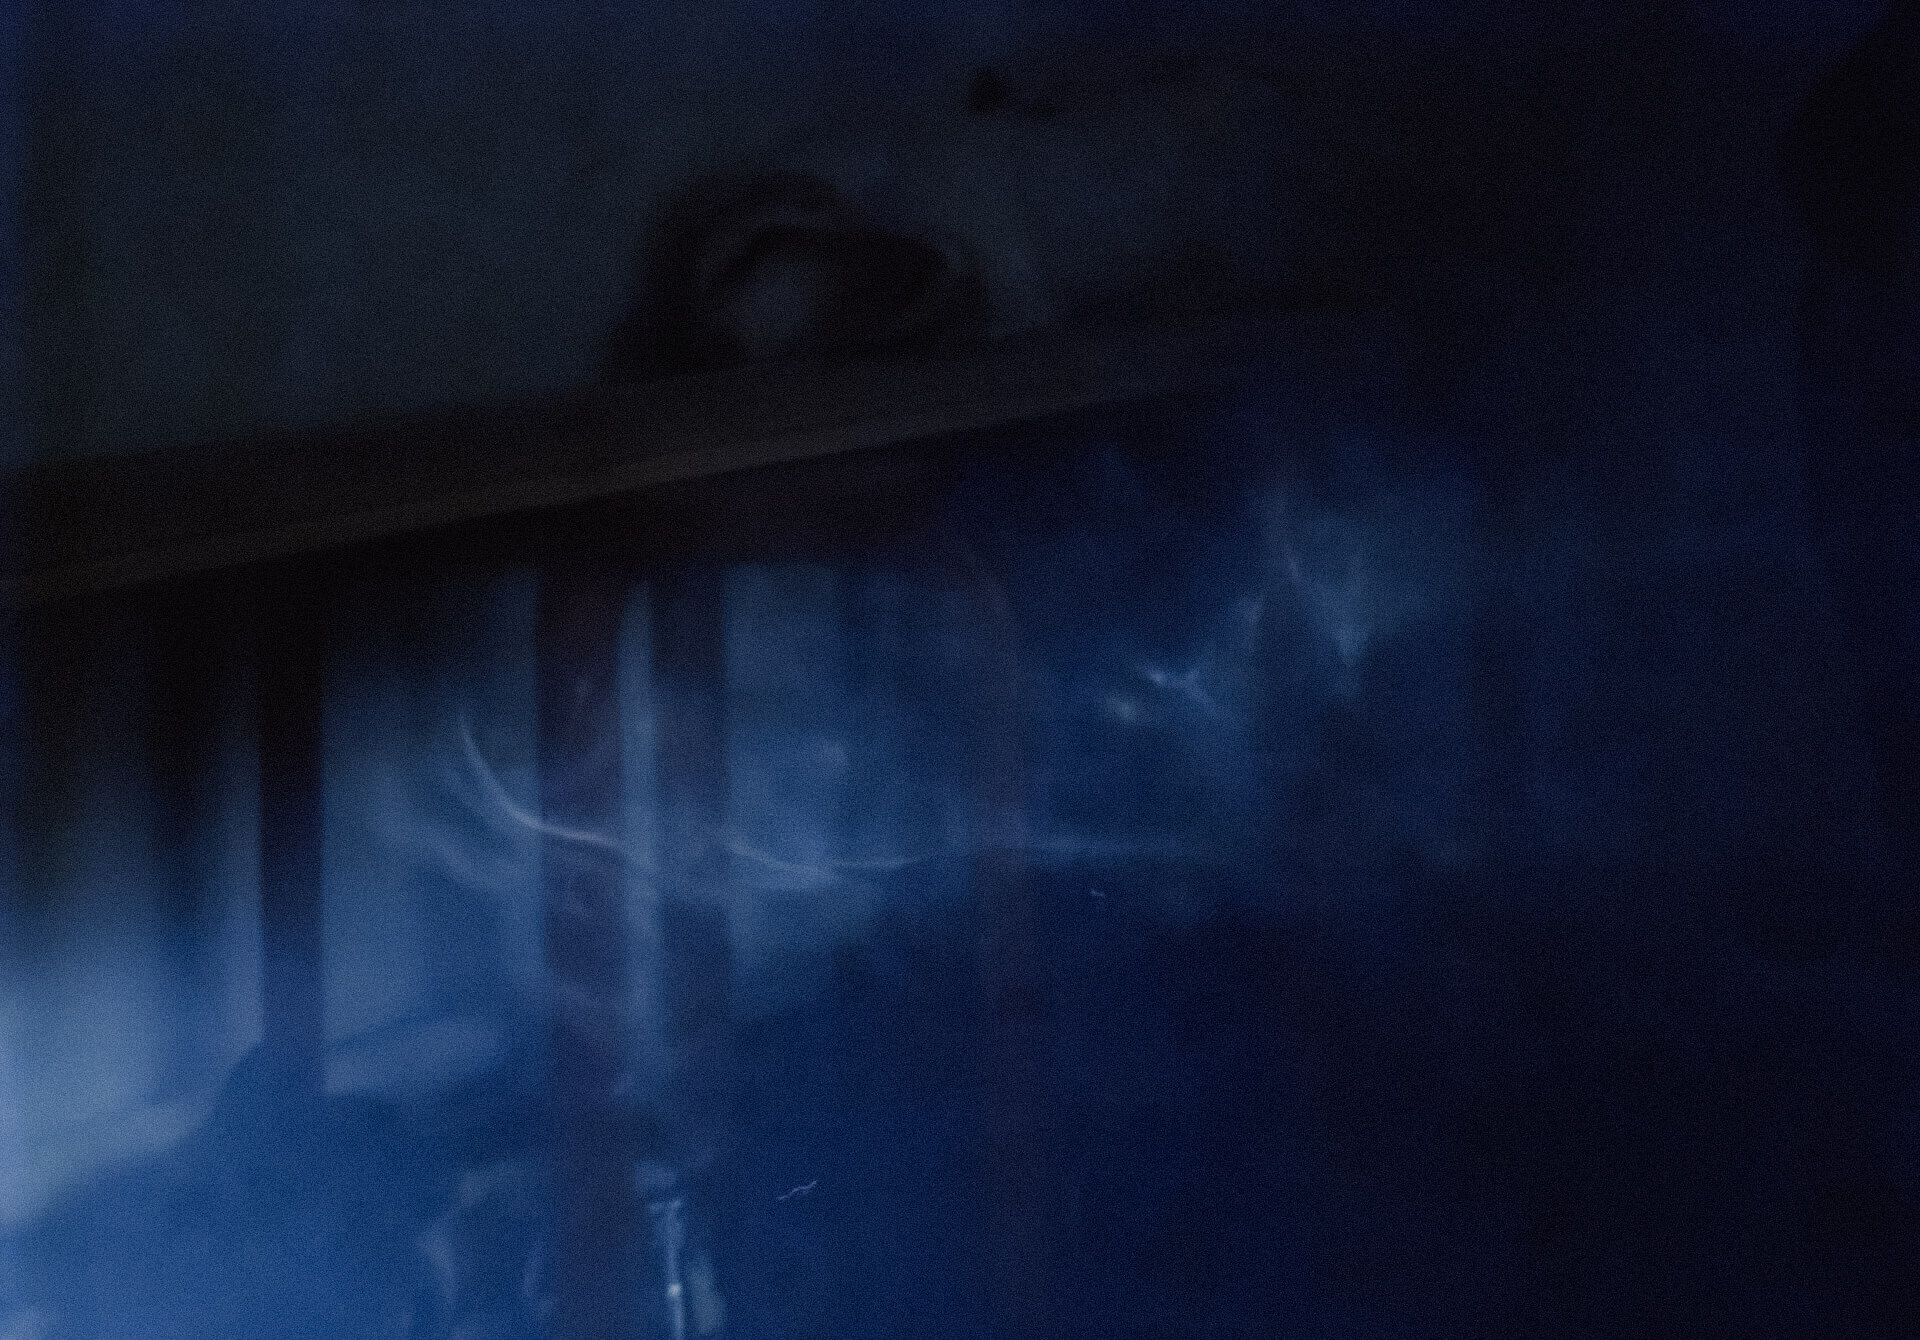 Dark room hinted with dimmed blue lighting. The light highlights fog in the room.